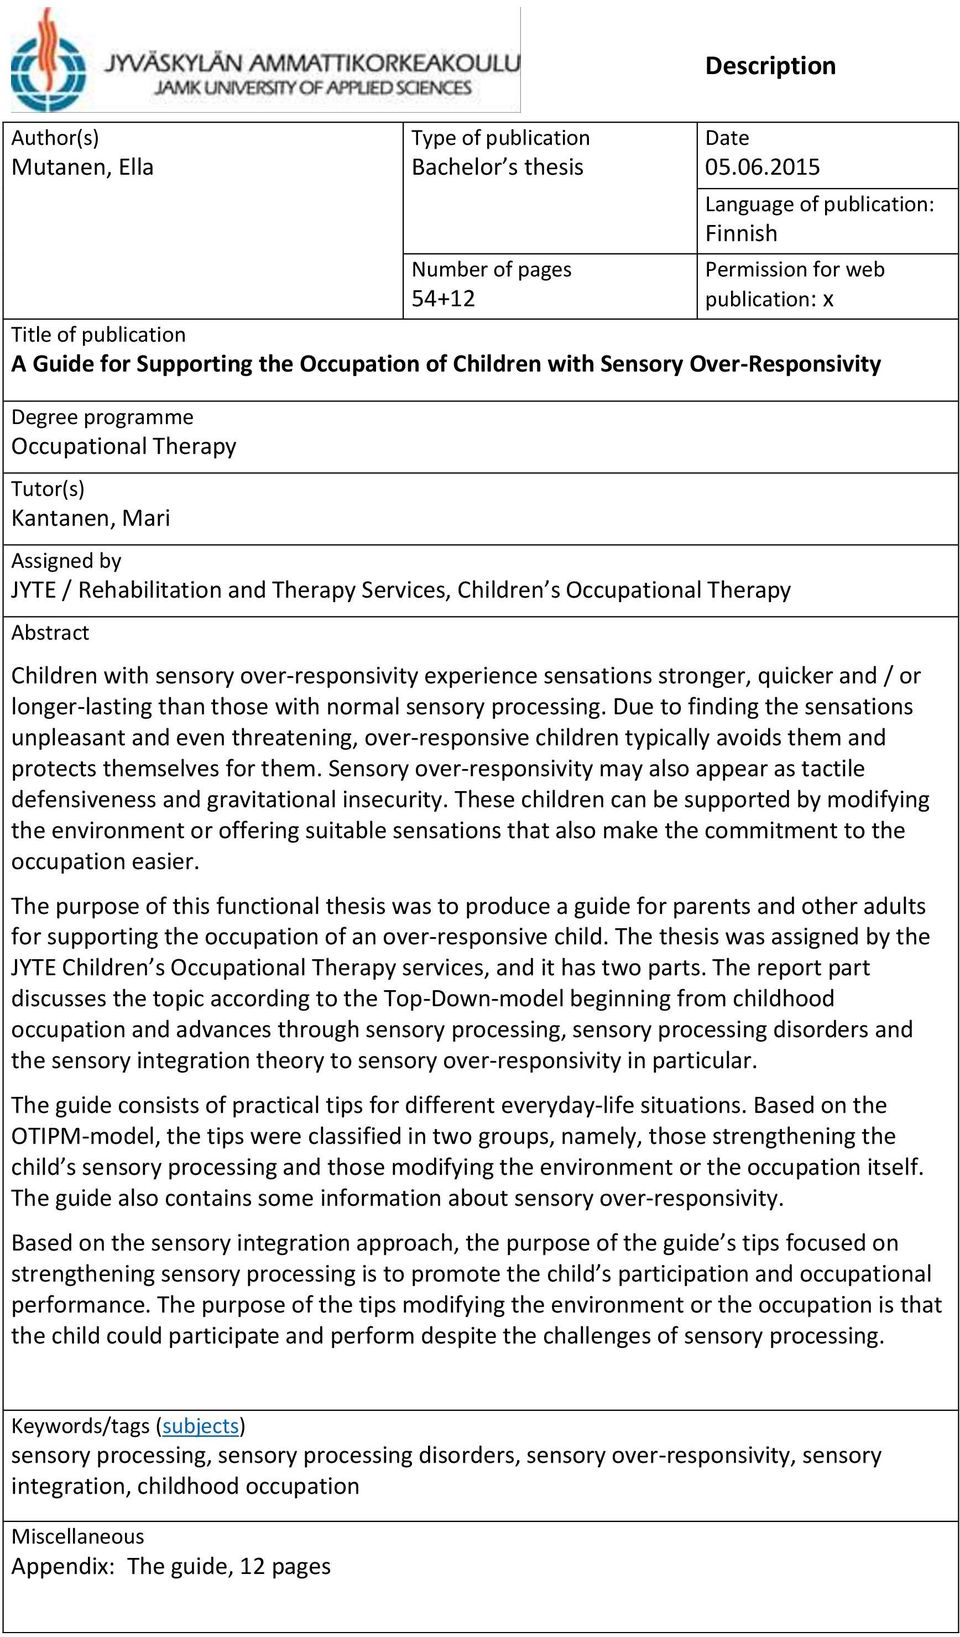 Occupational Therapy Tutor(s) Kantanen, Mari Assigned by JYTE / Rehabilitation and Therapy Services, Children s Occupational Therapy Abstract Children with sensory over-responsivity experience